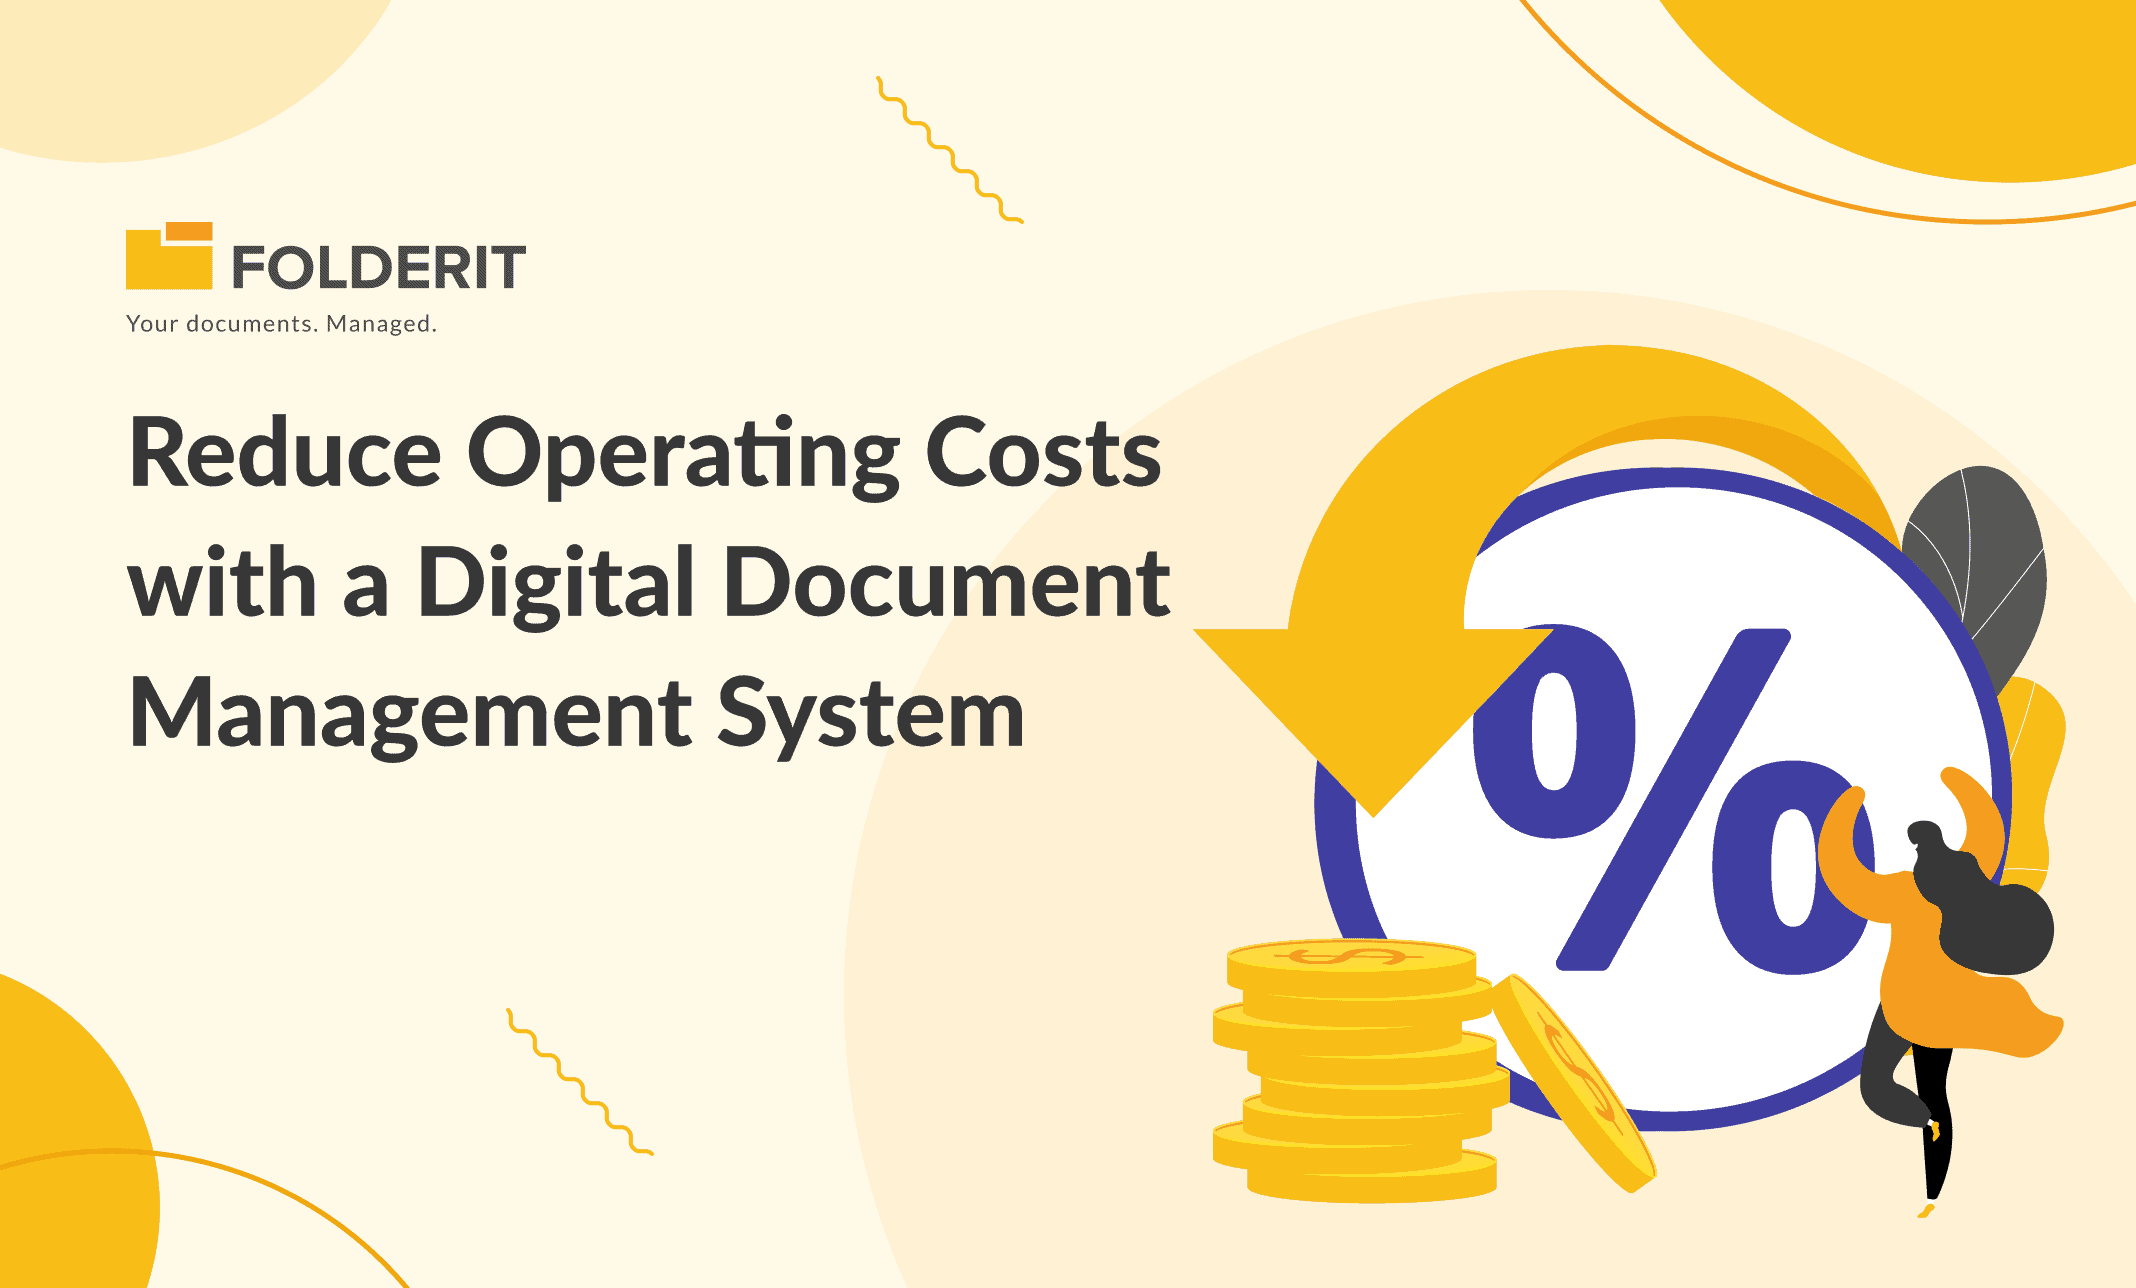 Reduce Operating Costs with a Digital Document Management System